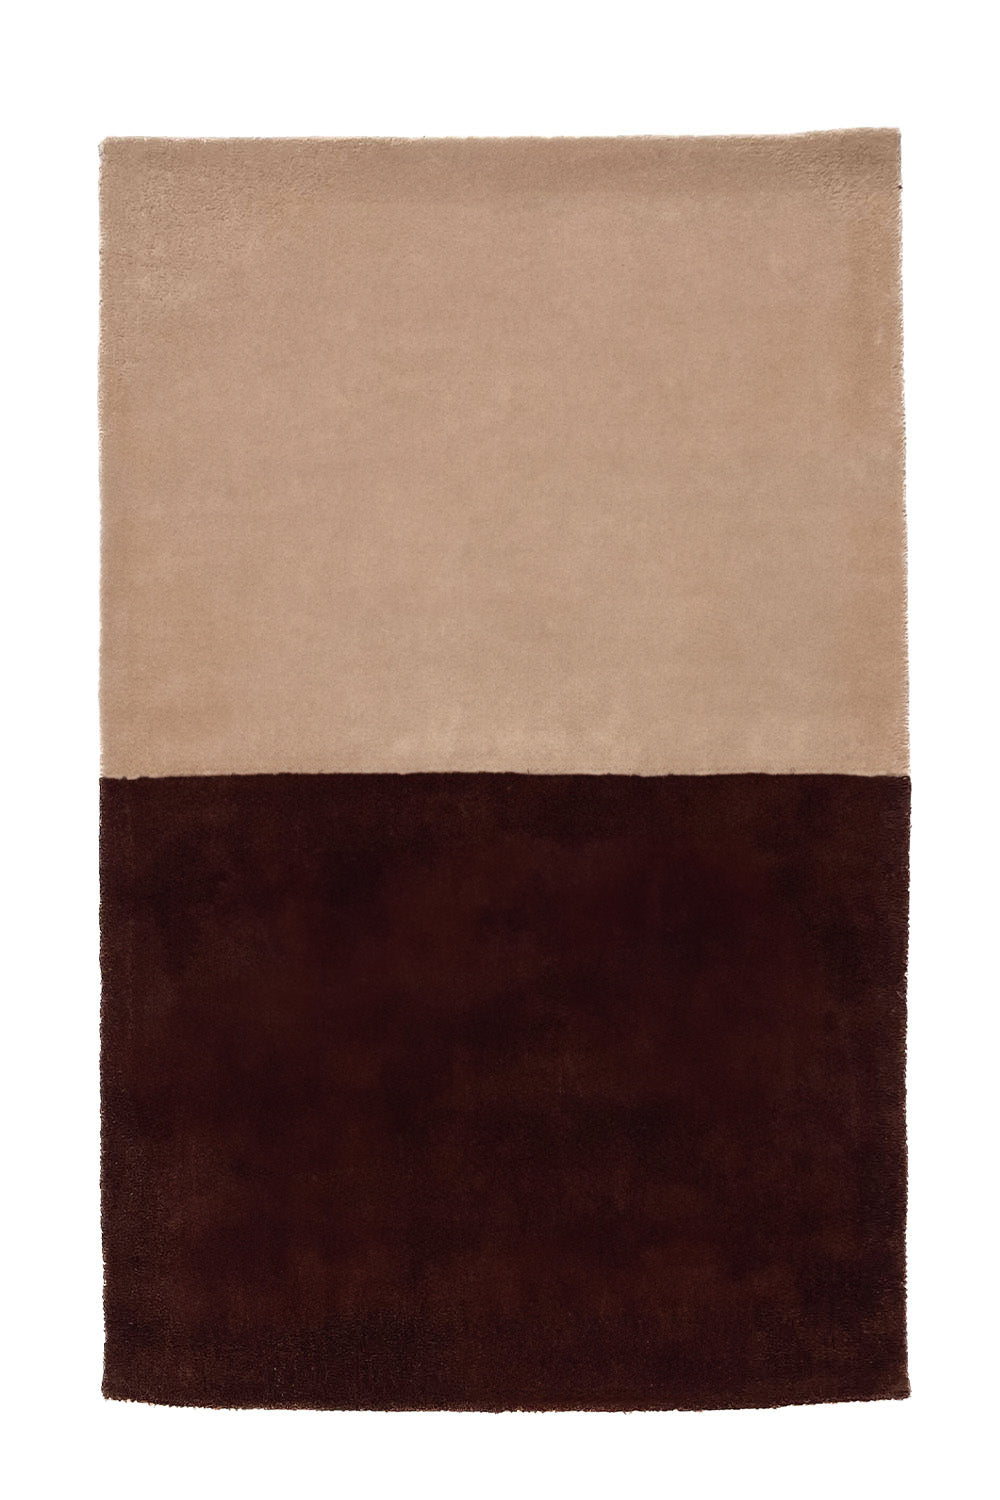 Classic Color Block Hand Tufted Wool Rug by JUBI